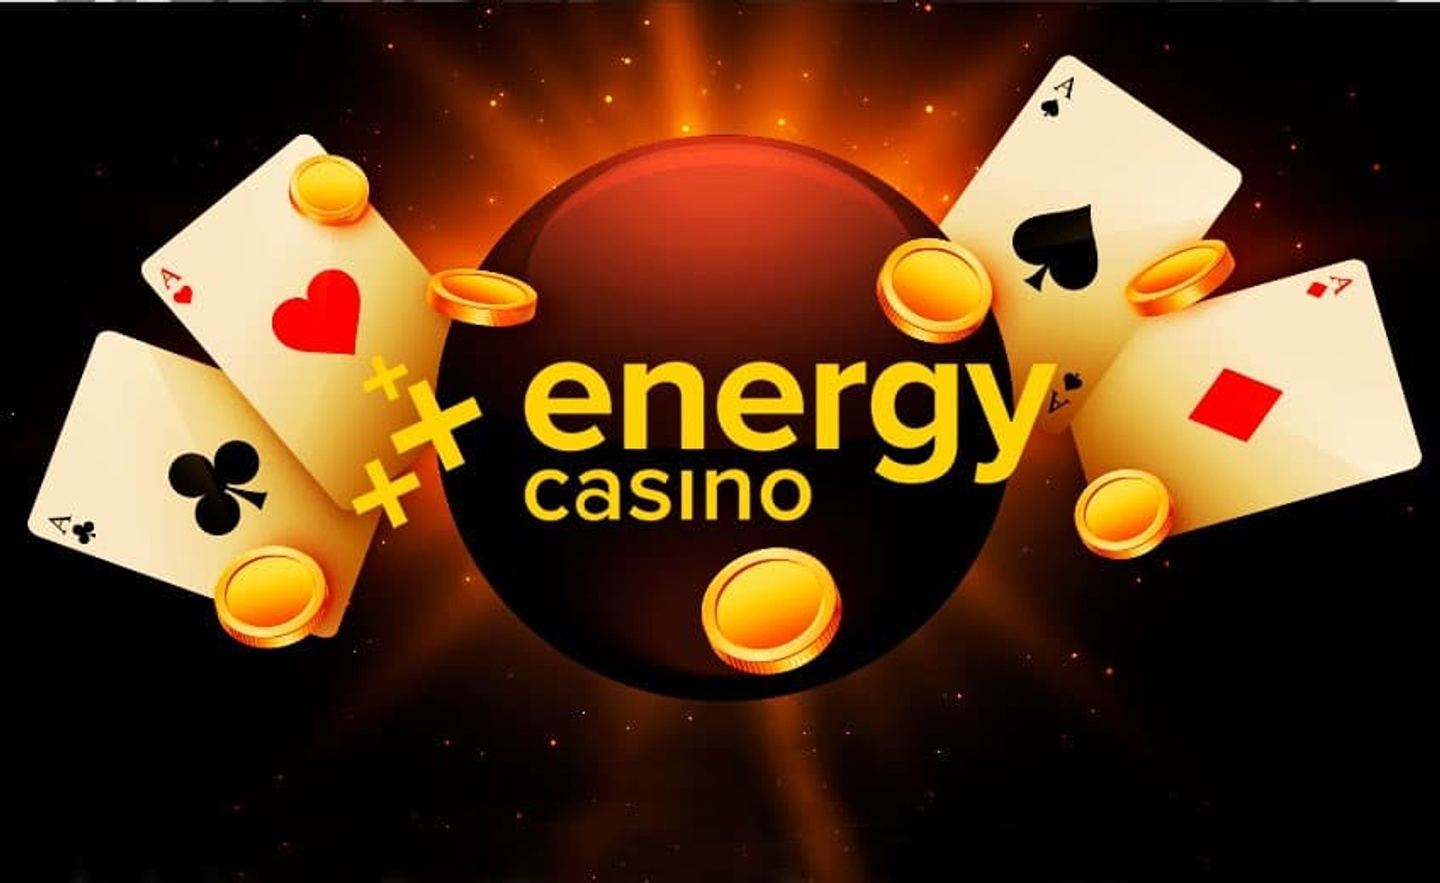 What is the critical way to bet in an online casino?